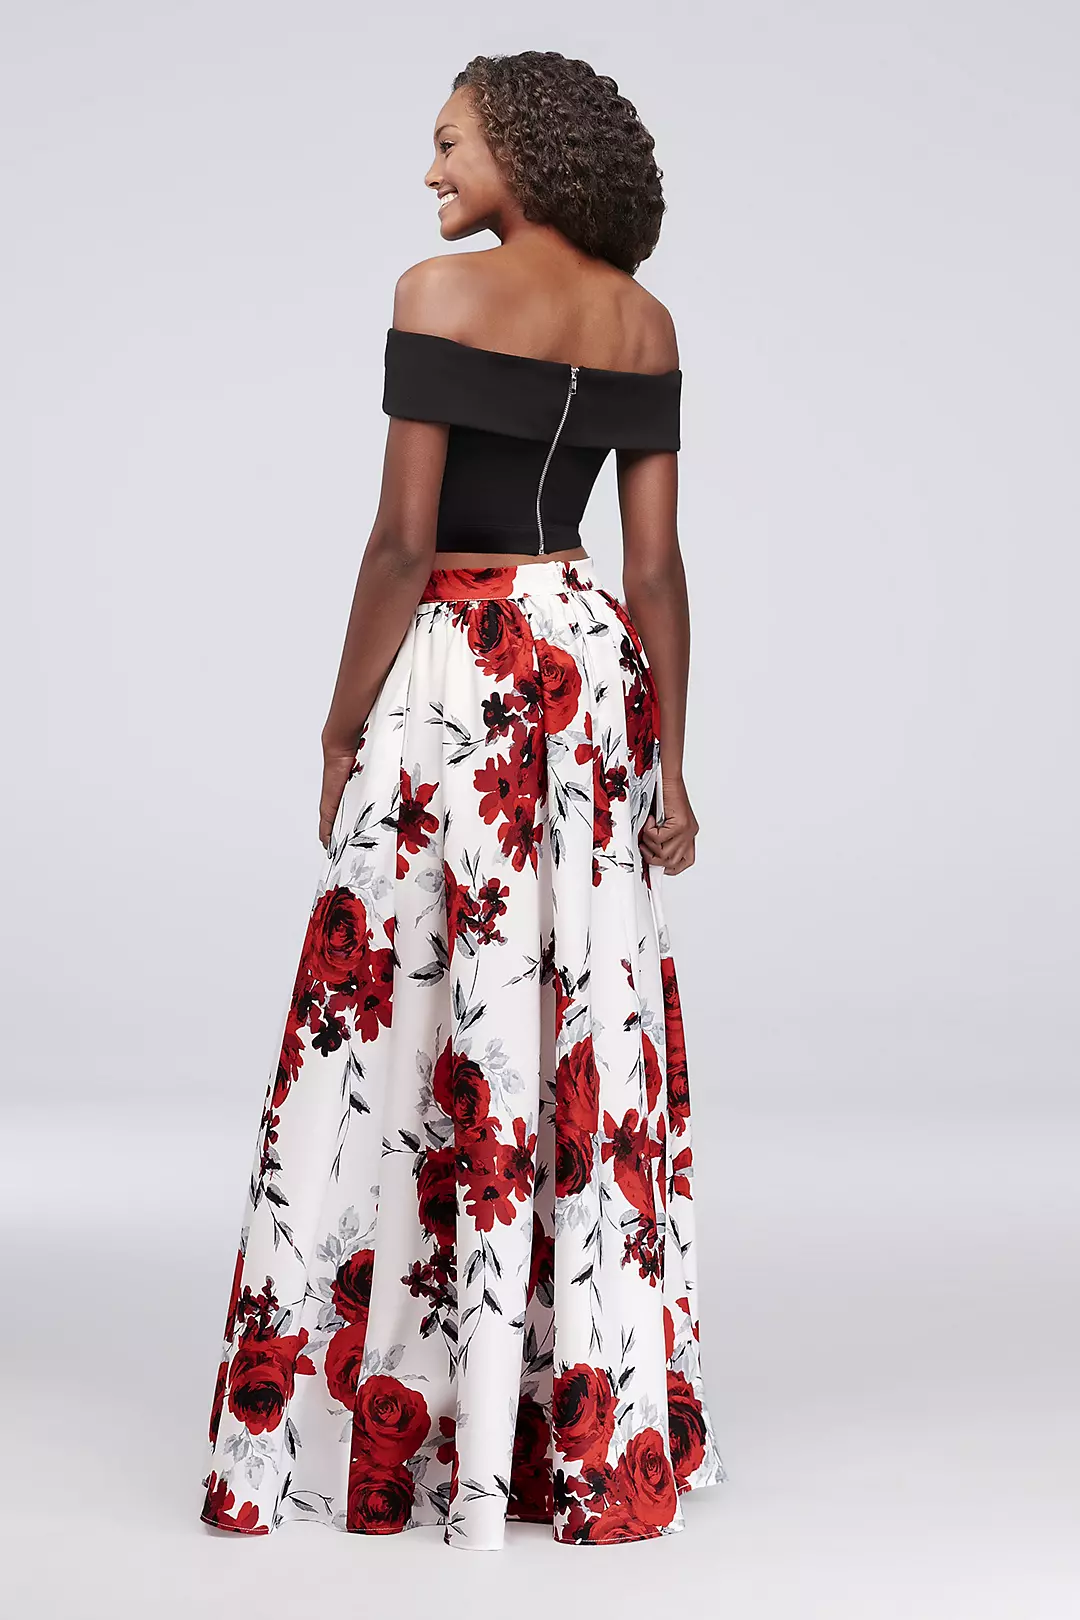 Floral-Printed Satin and Lace Two-Piece Dress Image 2